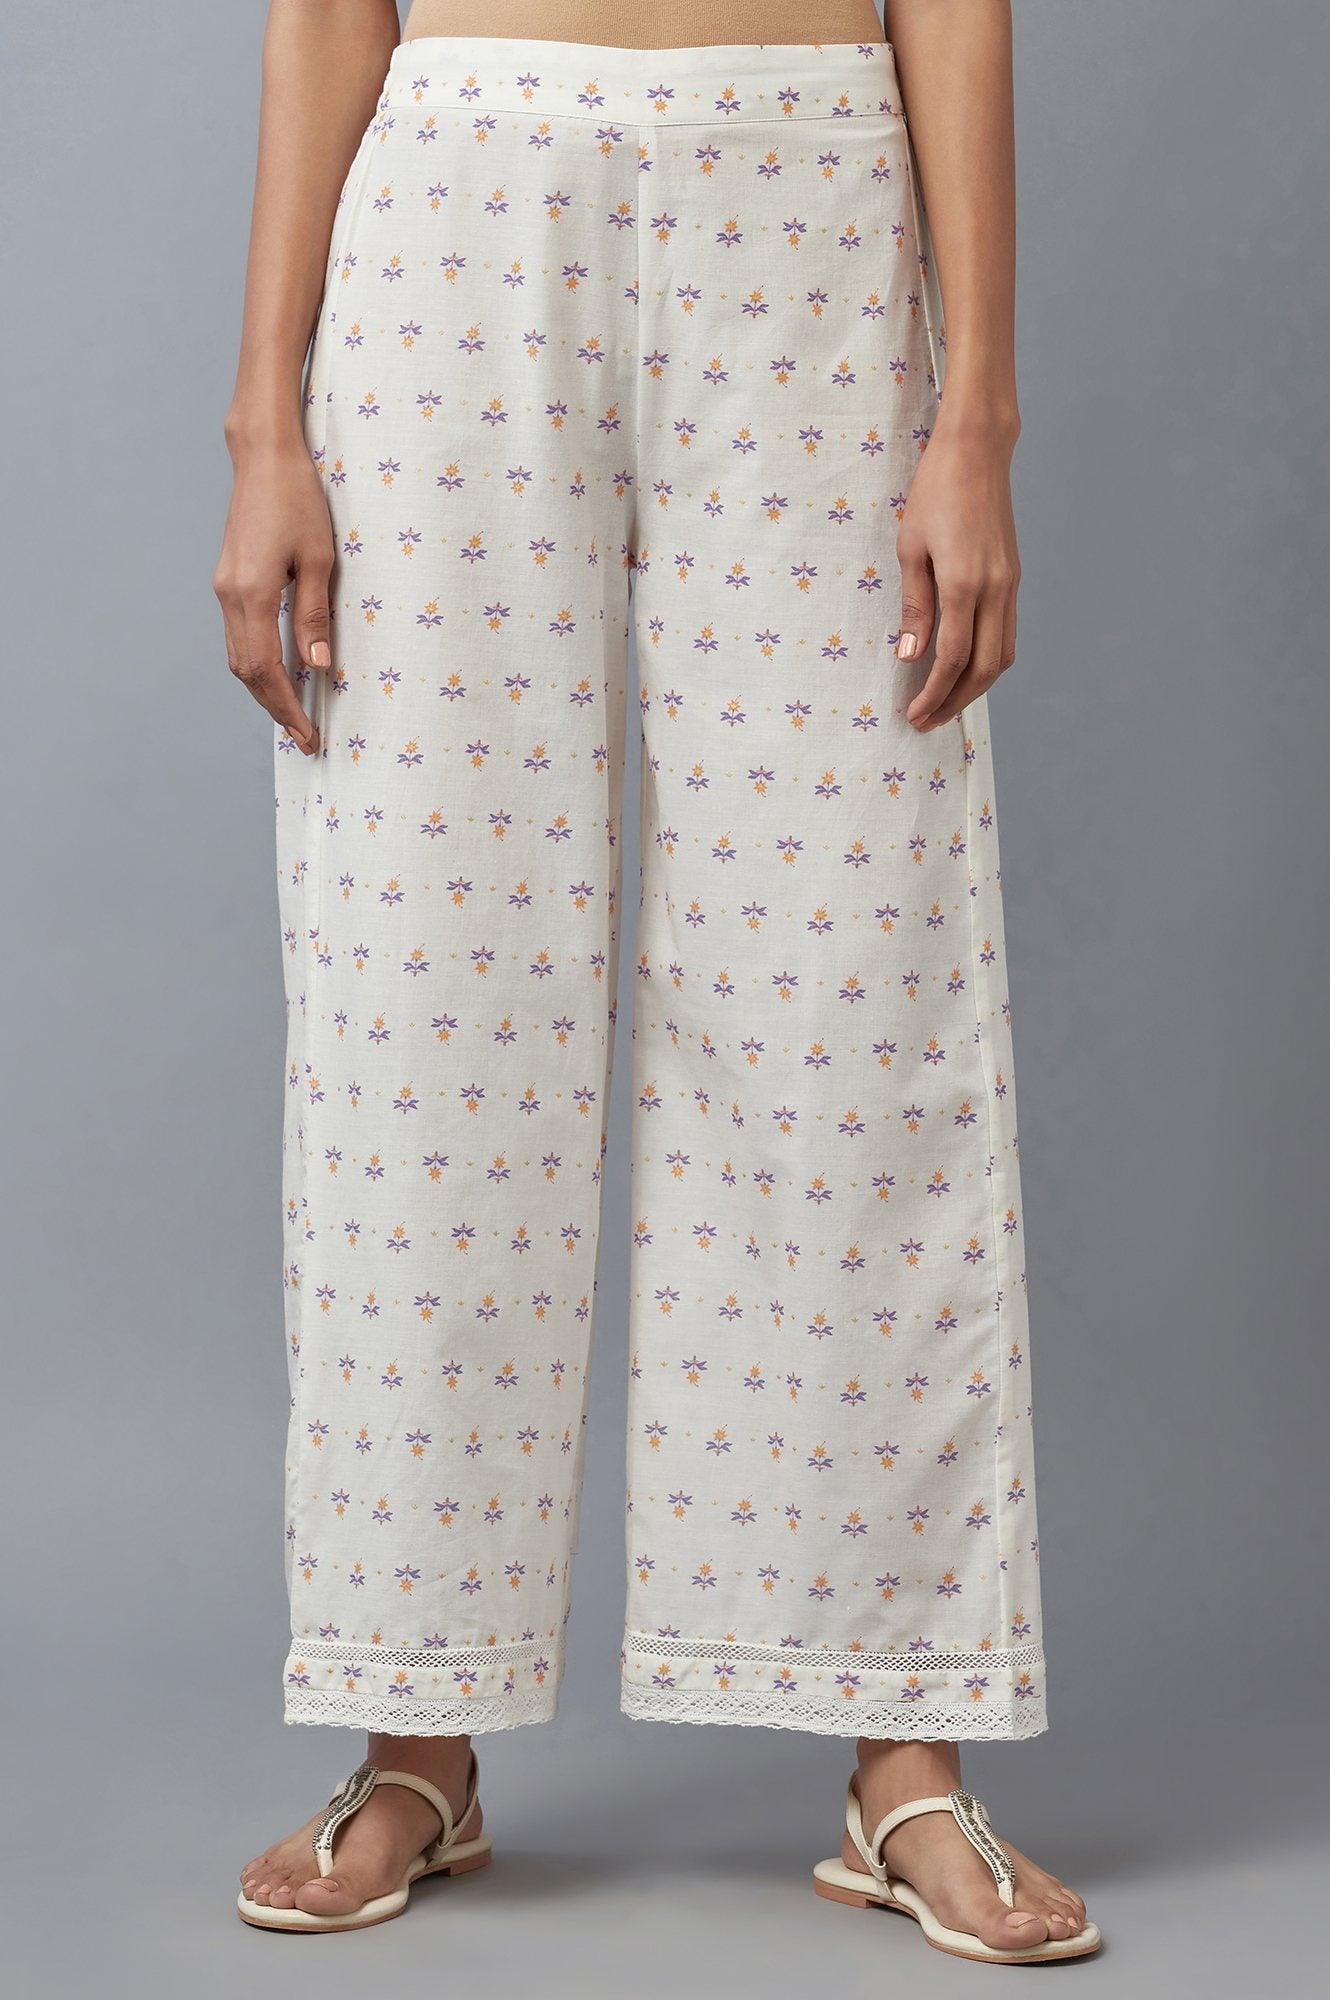 Ecru Floral Printed Parallel Pants with Lace - wforwoman